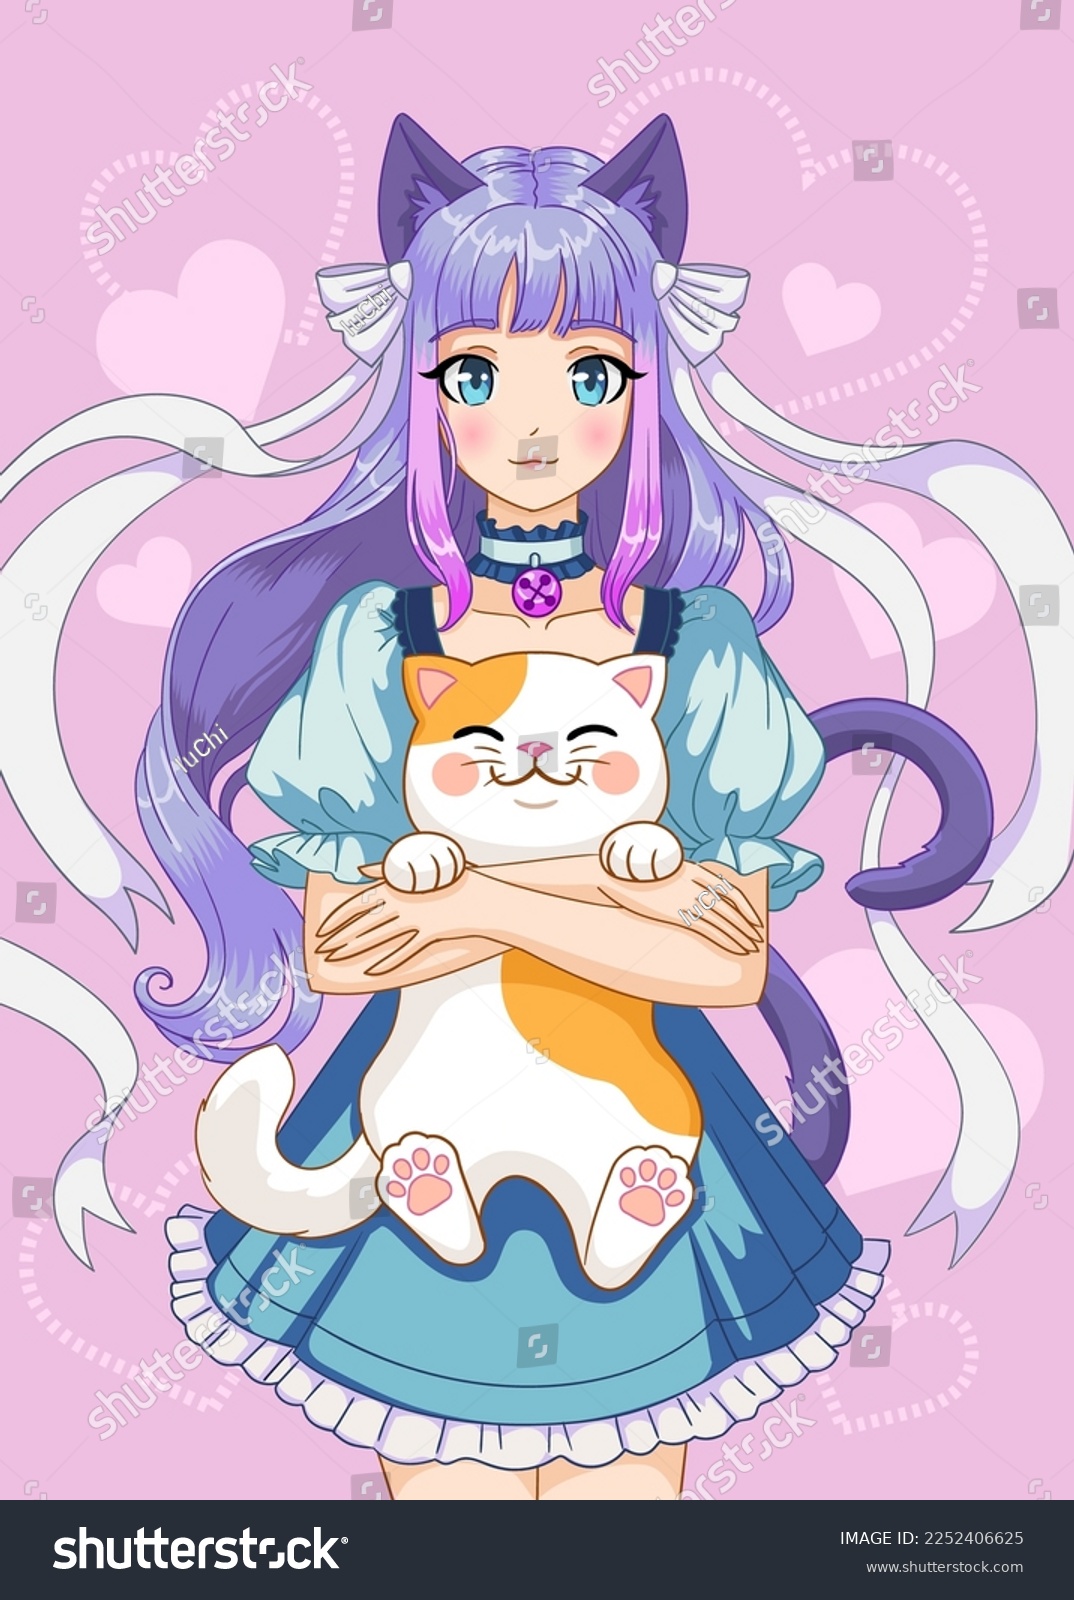 Cute anime girl holding a cat in her arms. Cartoon vector illustration #2252406625